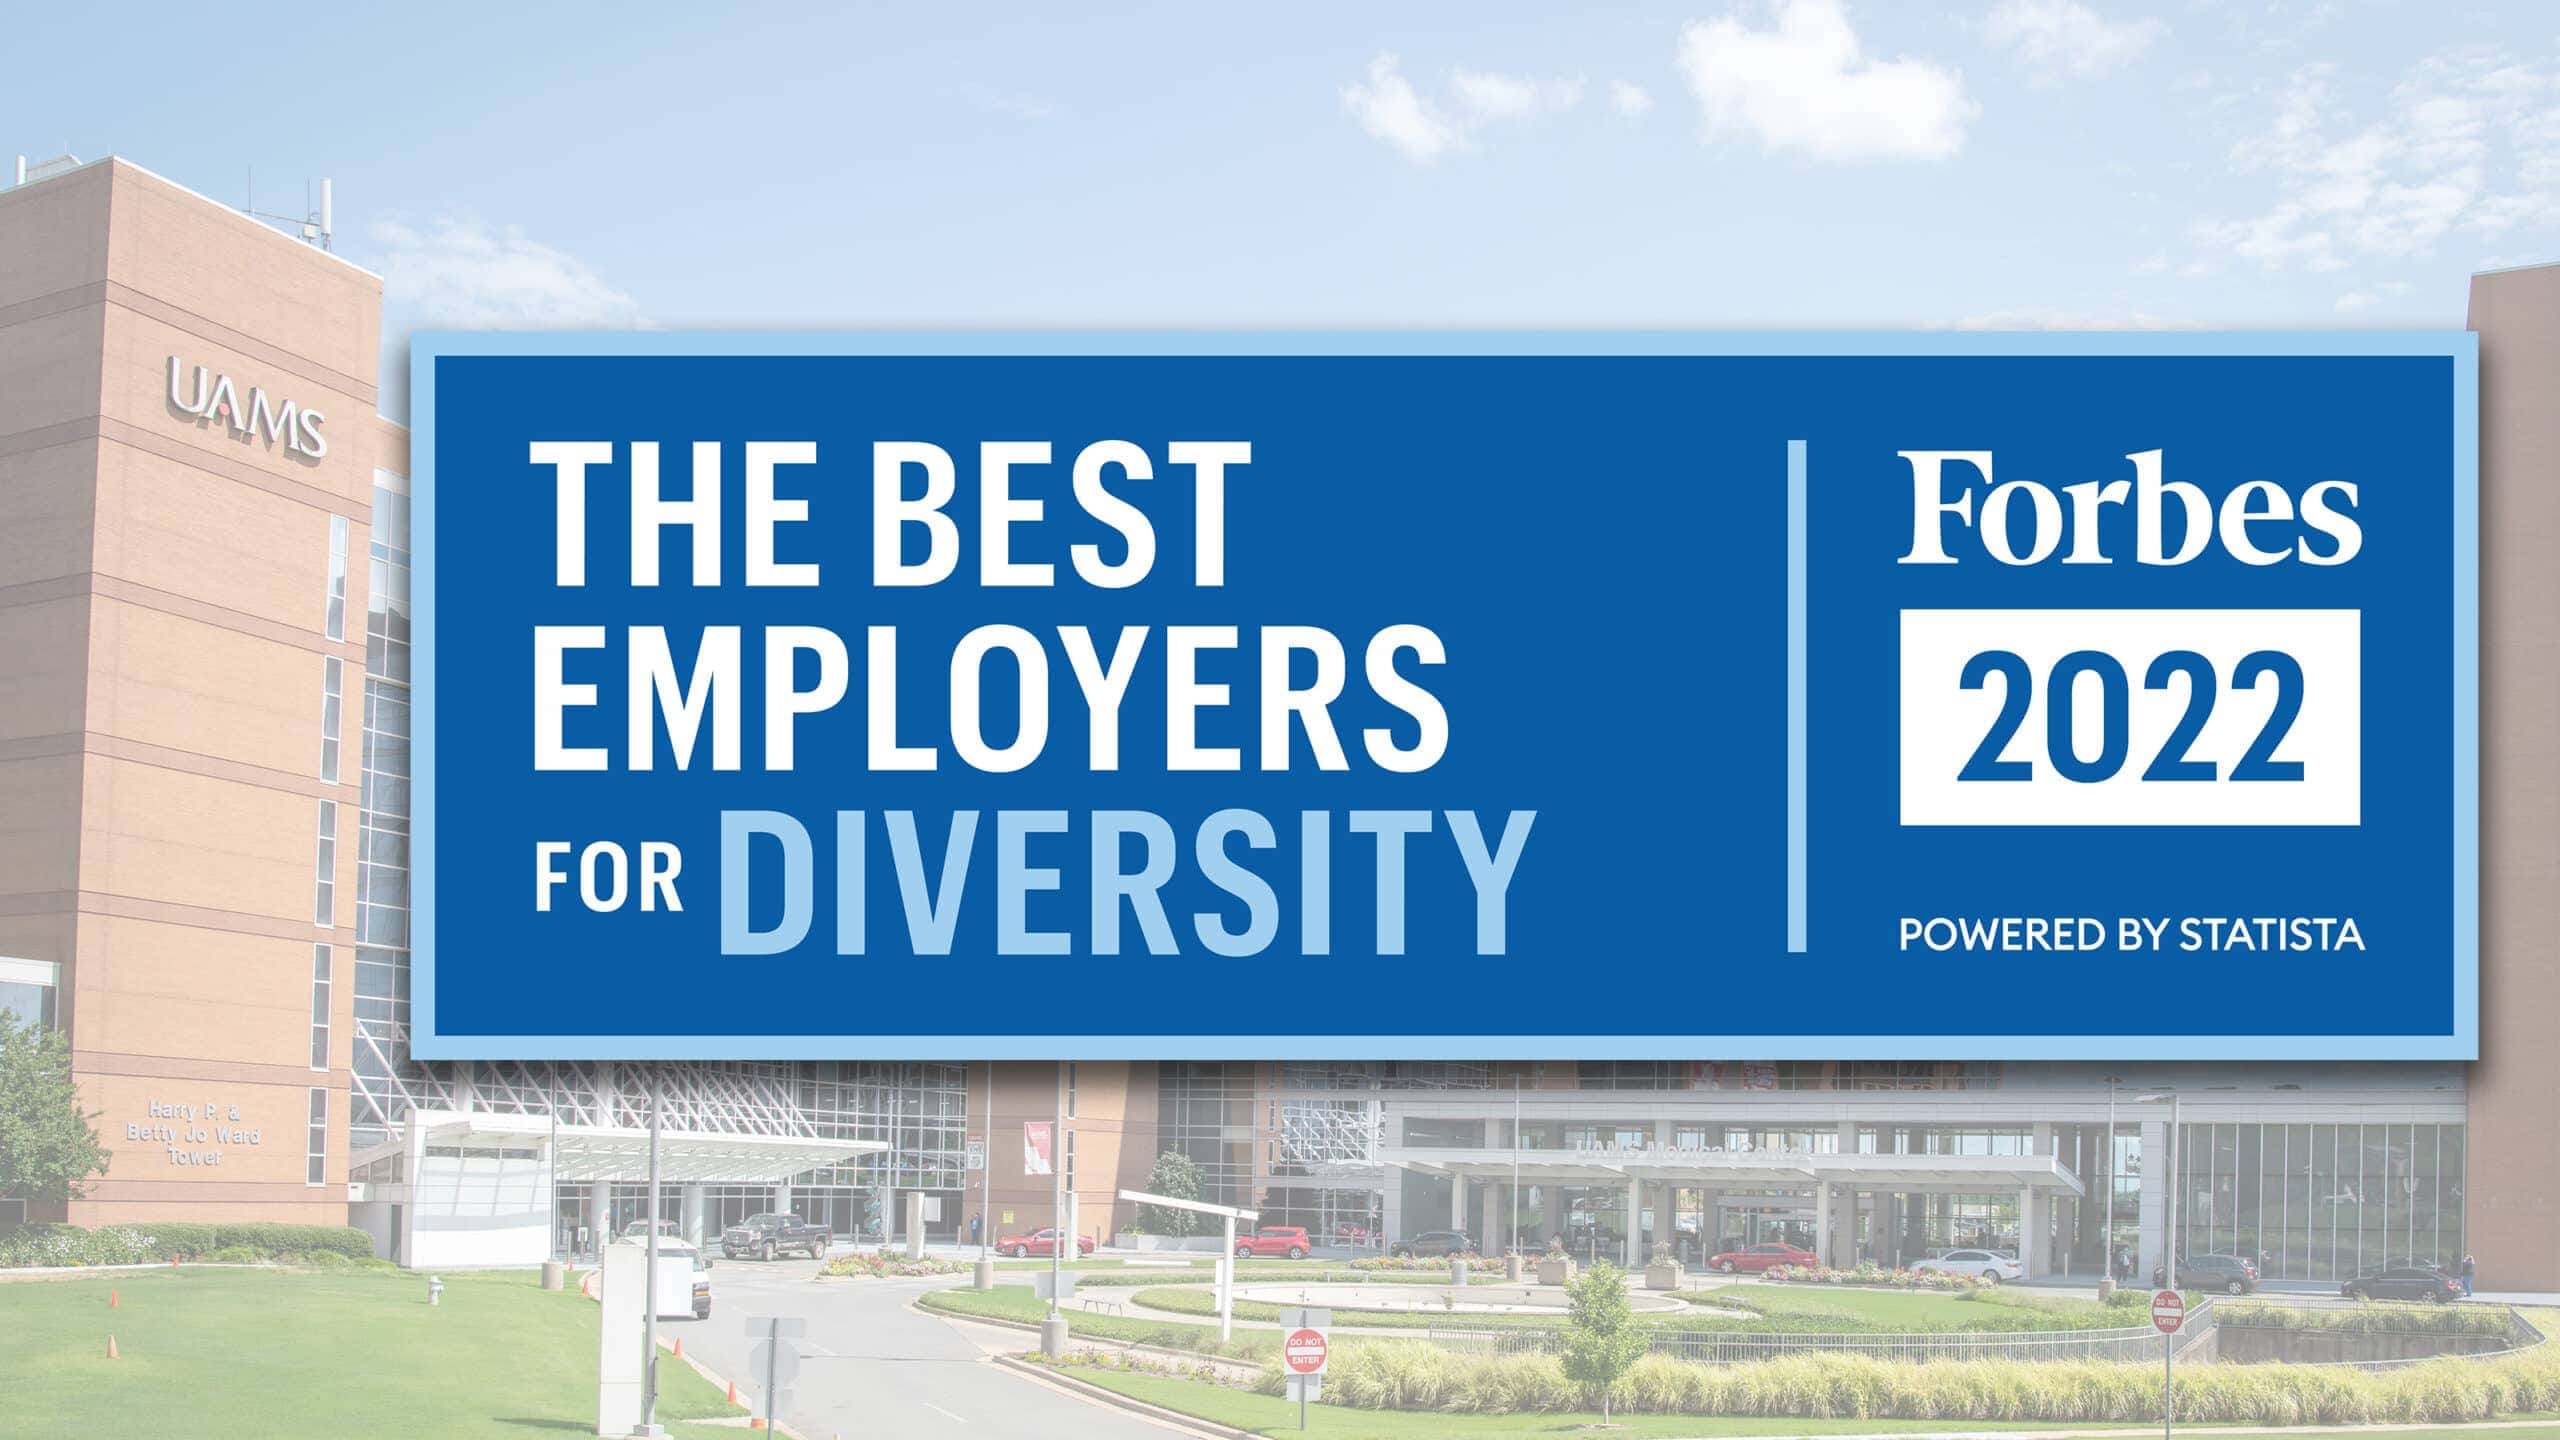 UAMS Ranks Fourth in Education on Forbes’ Best Employers for Diversity